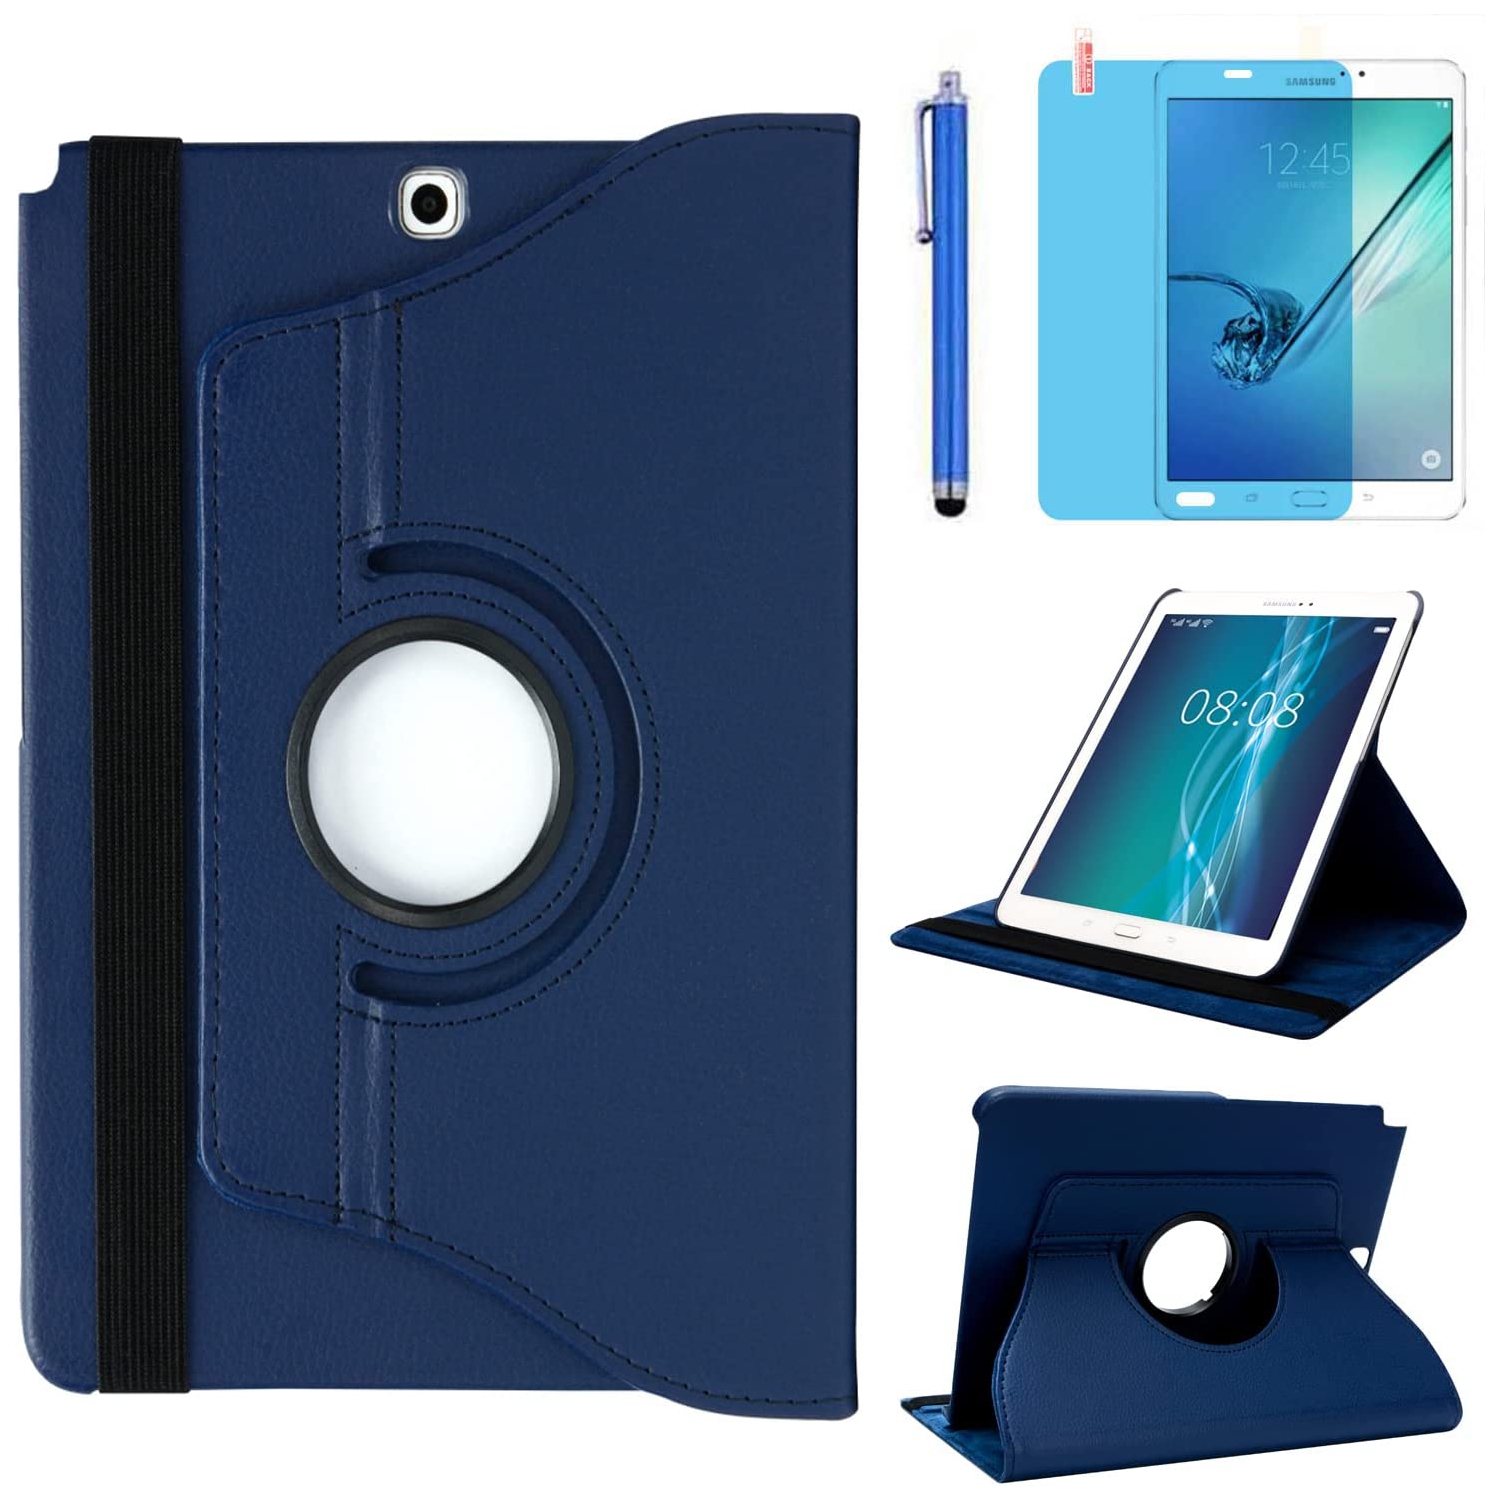 Case for Samsung Galaxy Tab A 9.7 inch (SM-P550 SM-T550 SM-T555) - 360 Degree Rotating Stand Case Smart Protective Cover,with Stylus Pen,Screen Film (Blue)